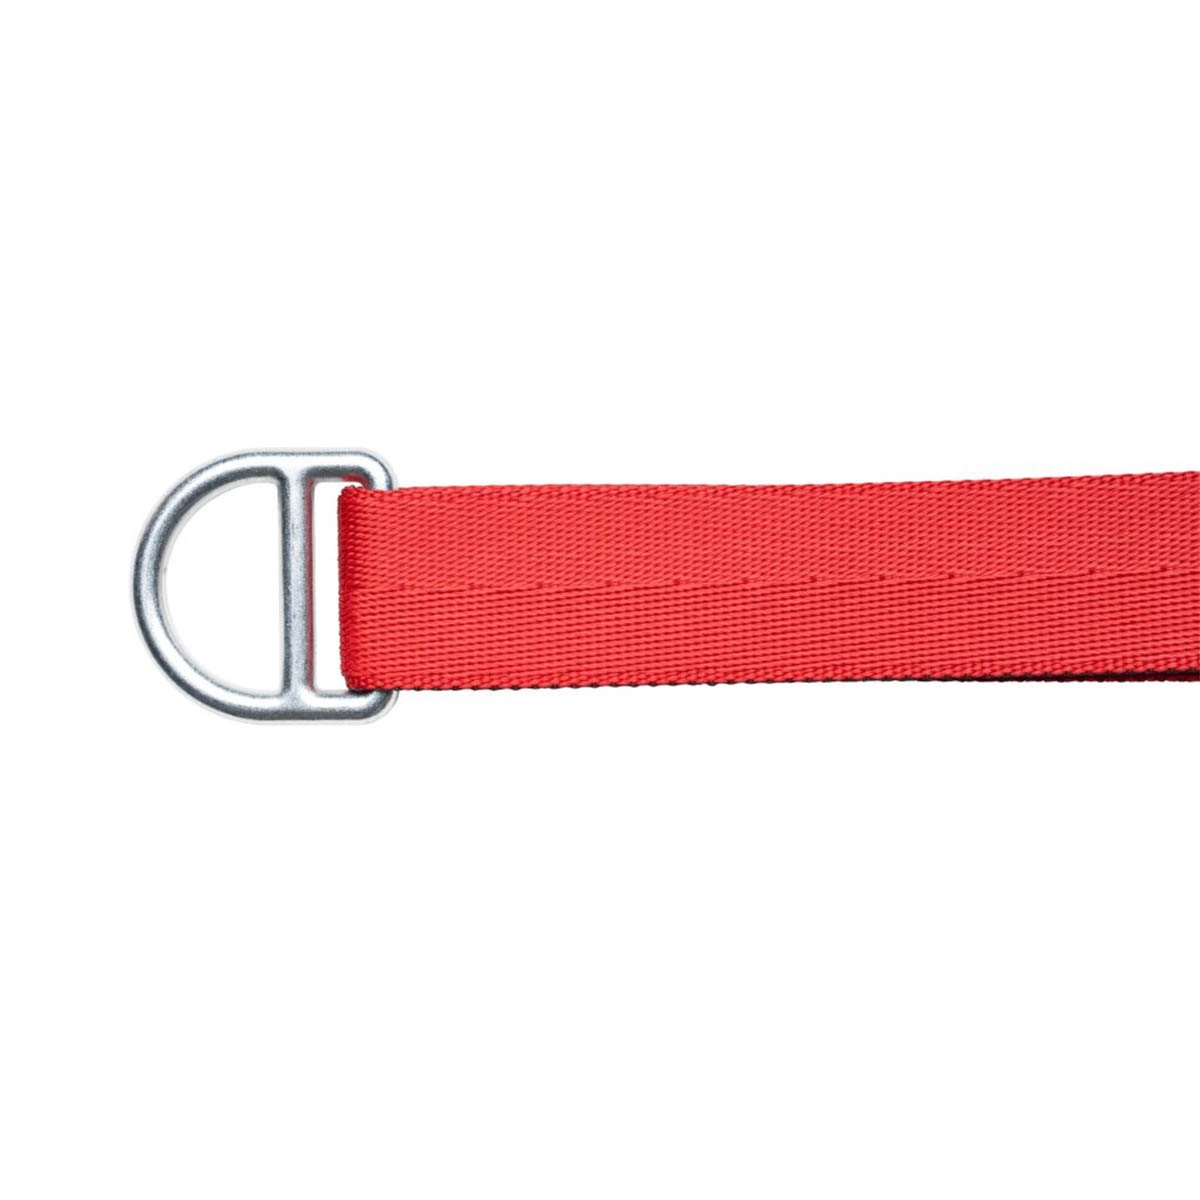 CMC SL Variable Anchor Strap (NFPA G Rated) – T'NT Work & Rescue